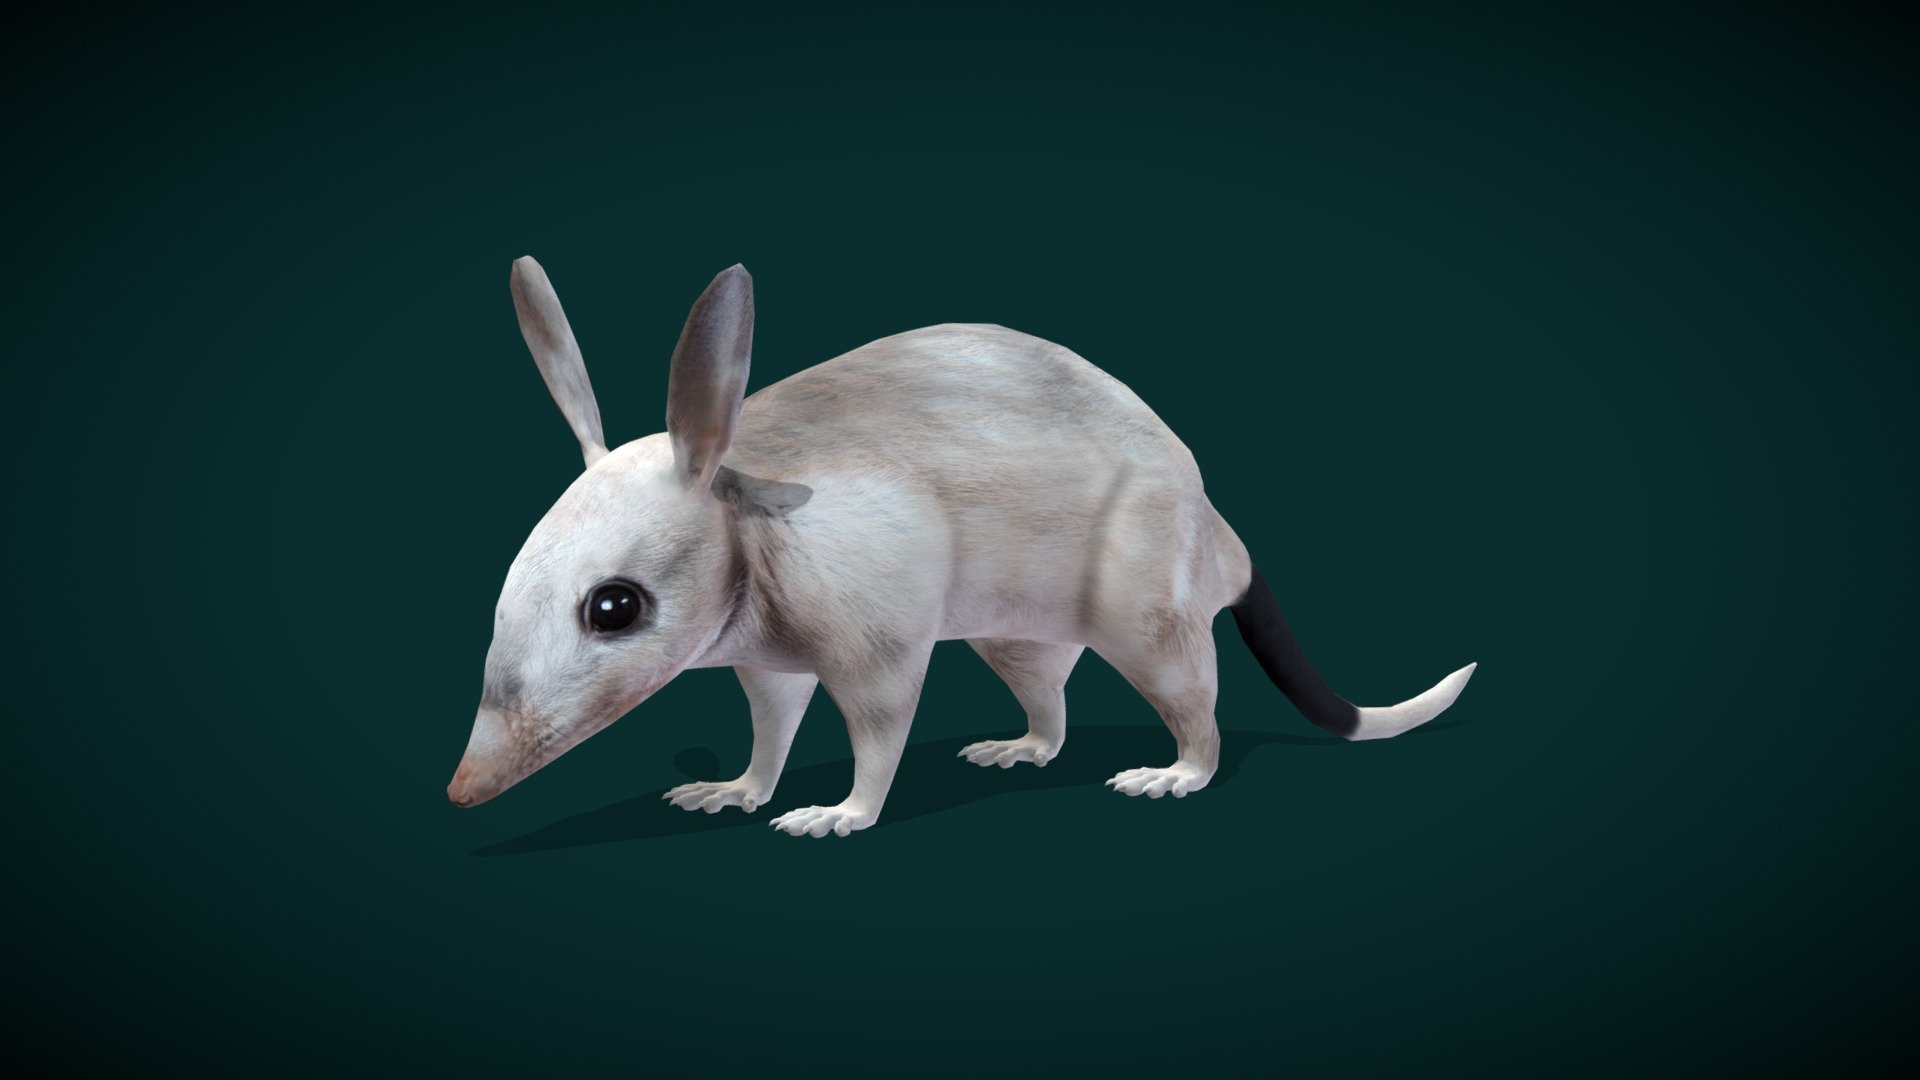 Greater Bilby (desert-dwelling marsupial )  Queensland's 15 endangered mammals

Macrotis rabbit-bandicoots Mammal ( Australia's Easter bunny )

1 Draw Calls

GameReady 

14 Animations

4K PBR Textures Material

Unreal FBX

Unity FBX  

Blend File 

USDZ File (AR Ready). Real Scale Dimension

Textures Files

GLB File

Gltf File ( Spark AR, Lens Studio(SnapChat) , Effector(Tiktok) , Spline, Play Canvas ) Compatible

Triangles : 8790

Vertices  : 4458

Faces     : 4425

Edges     : 8880
Diffuse , Metallic, Roughness , Normal Map ,Specular Map,AO

Macrotis is a genus of desert-dwelling marsupial omnivores known as bilbies or rabbit-bandicoots; they are members of the order Peramelemorphia. At the time of European colonisation of Australia, there were two species. The lesser bilby became extinct in the 1950s; the greater bilby survives but remains endangered. 
Scientific name: Macrotis
 - Greater Bilby Animal (Lowpoly) - 3D model by Nyilonelycompany 3d model